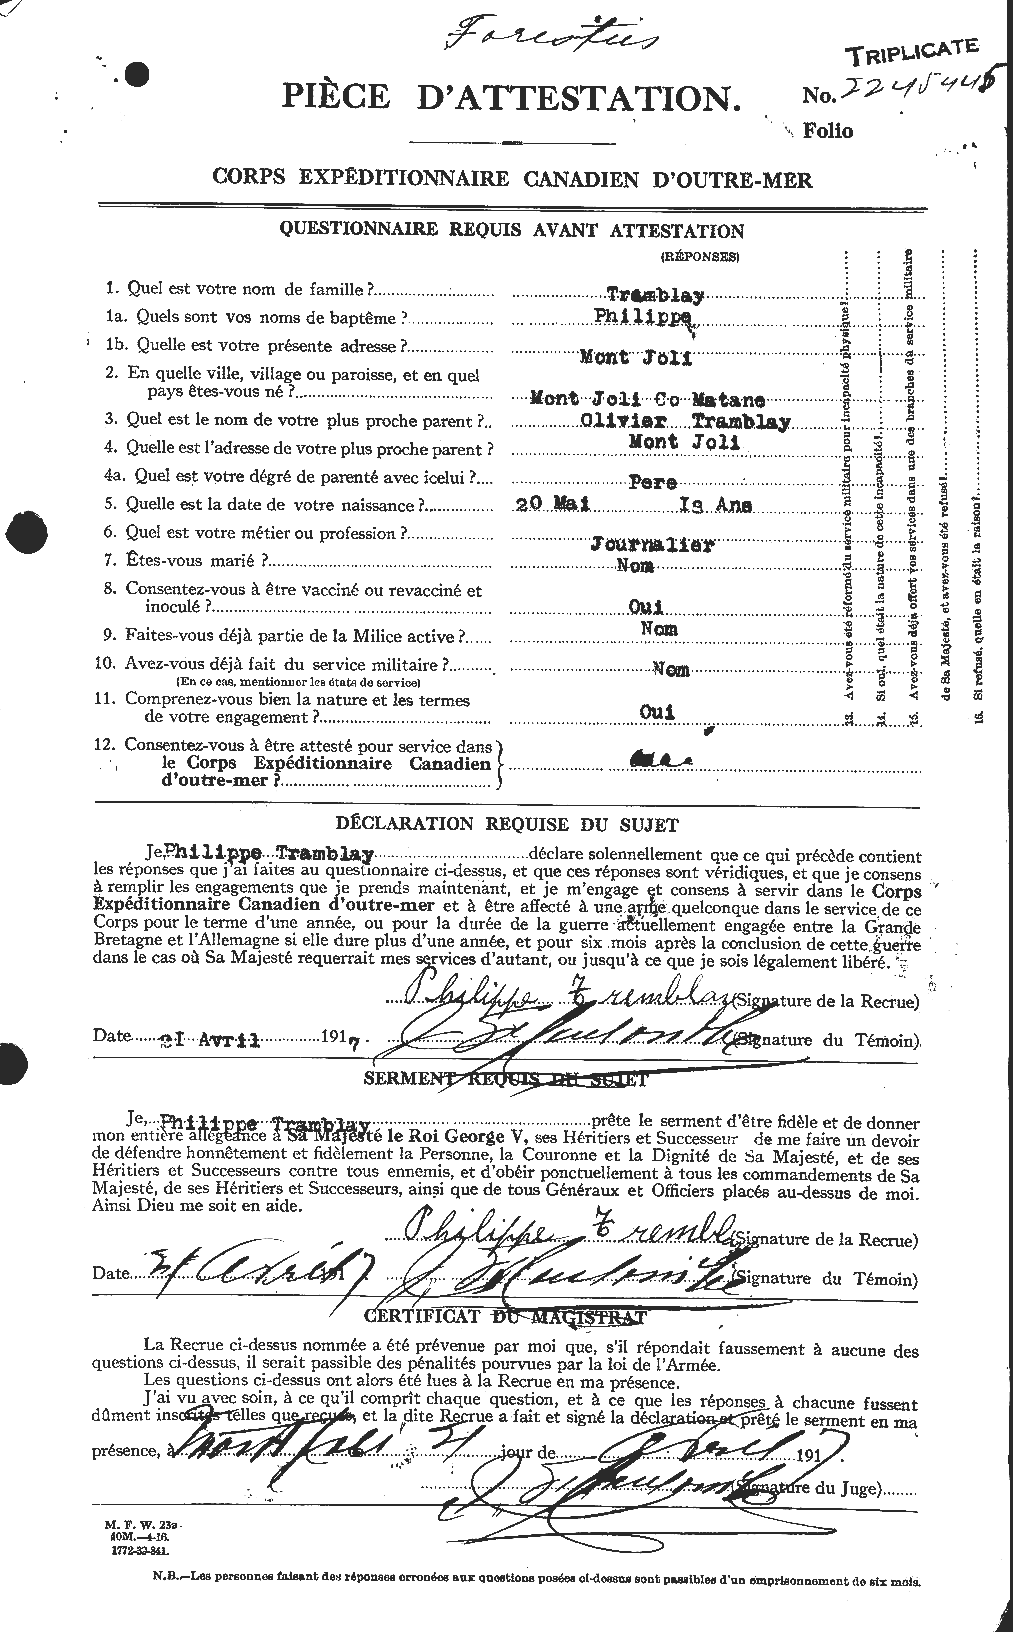 Personnel Records of the First World War - CEF 639237a